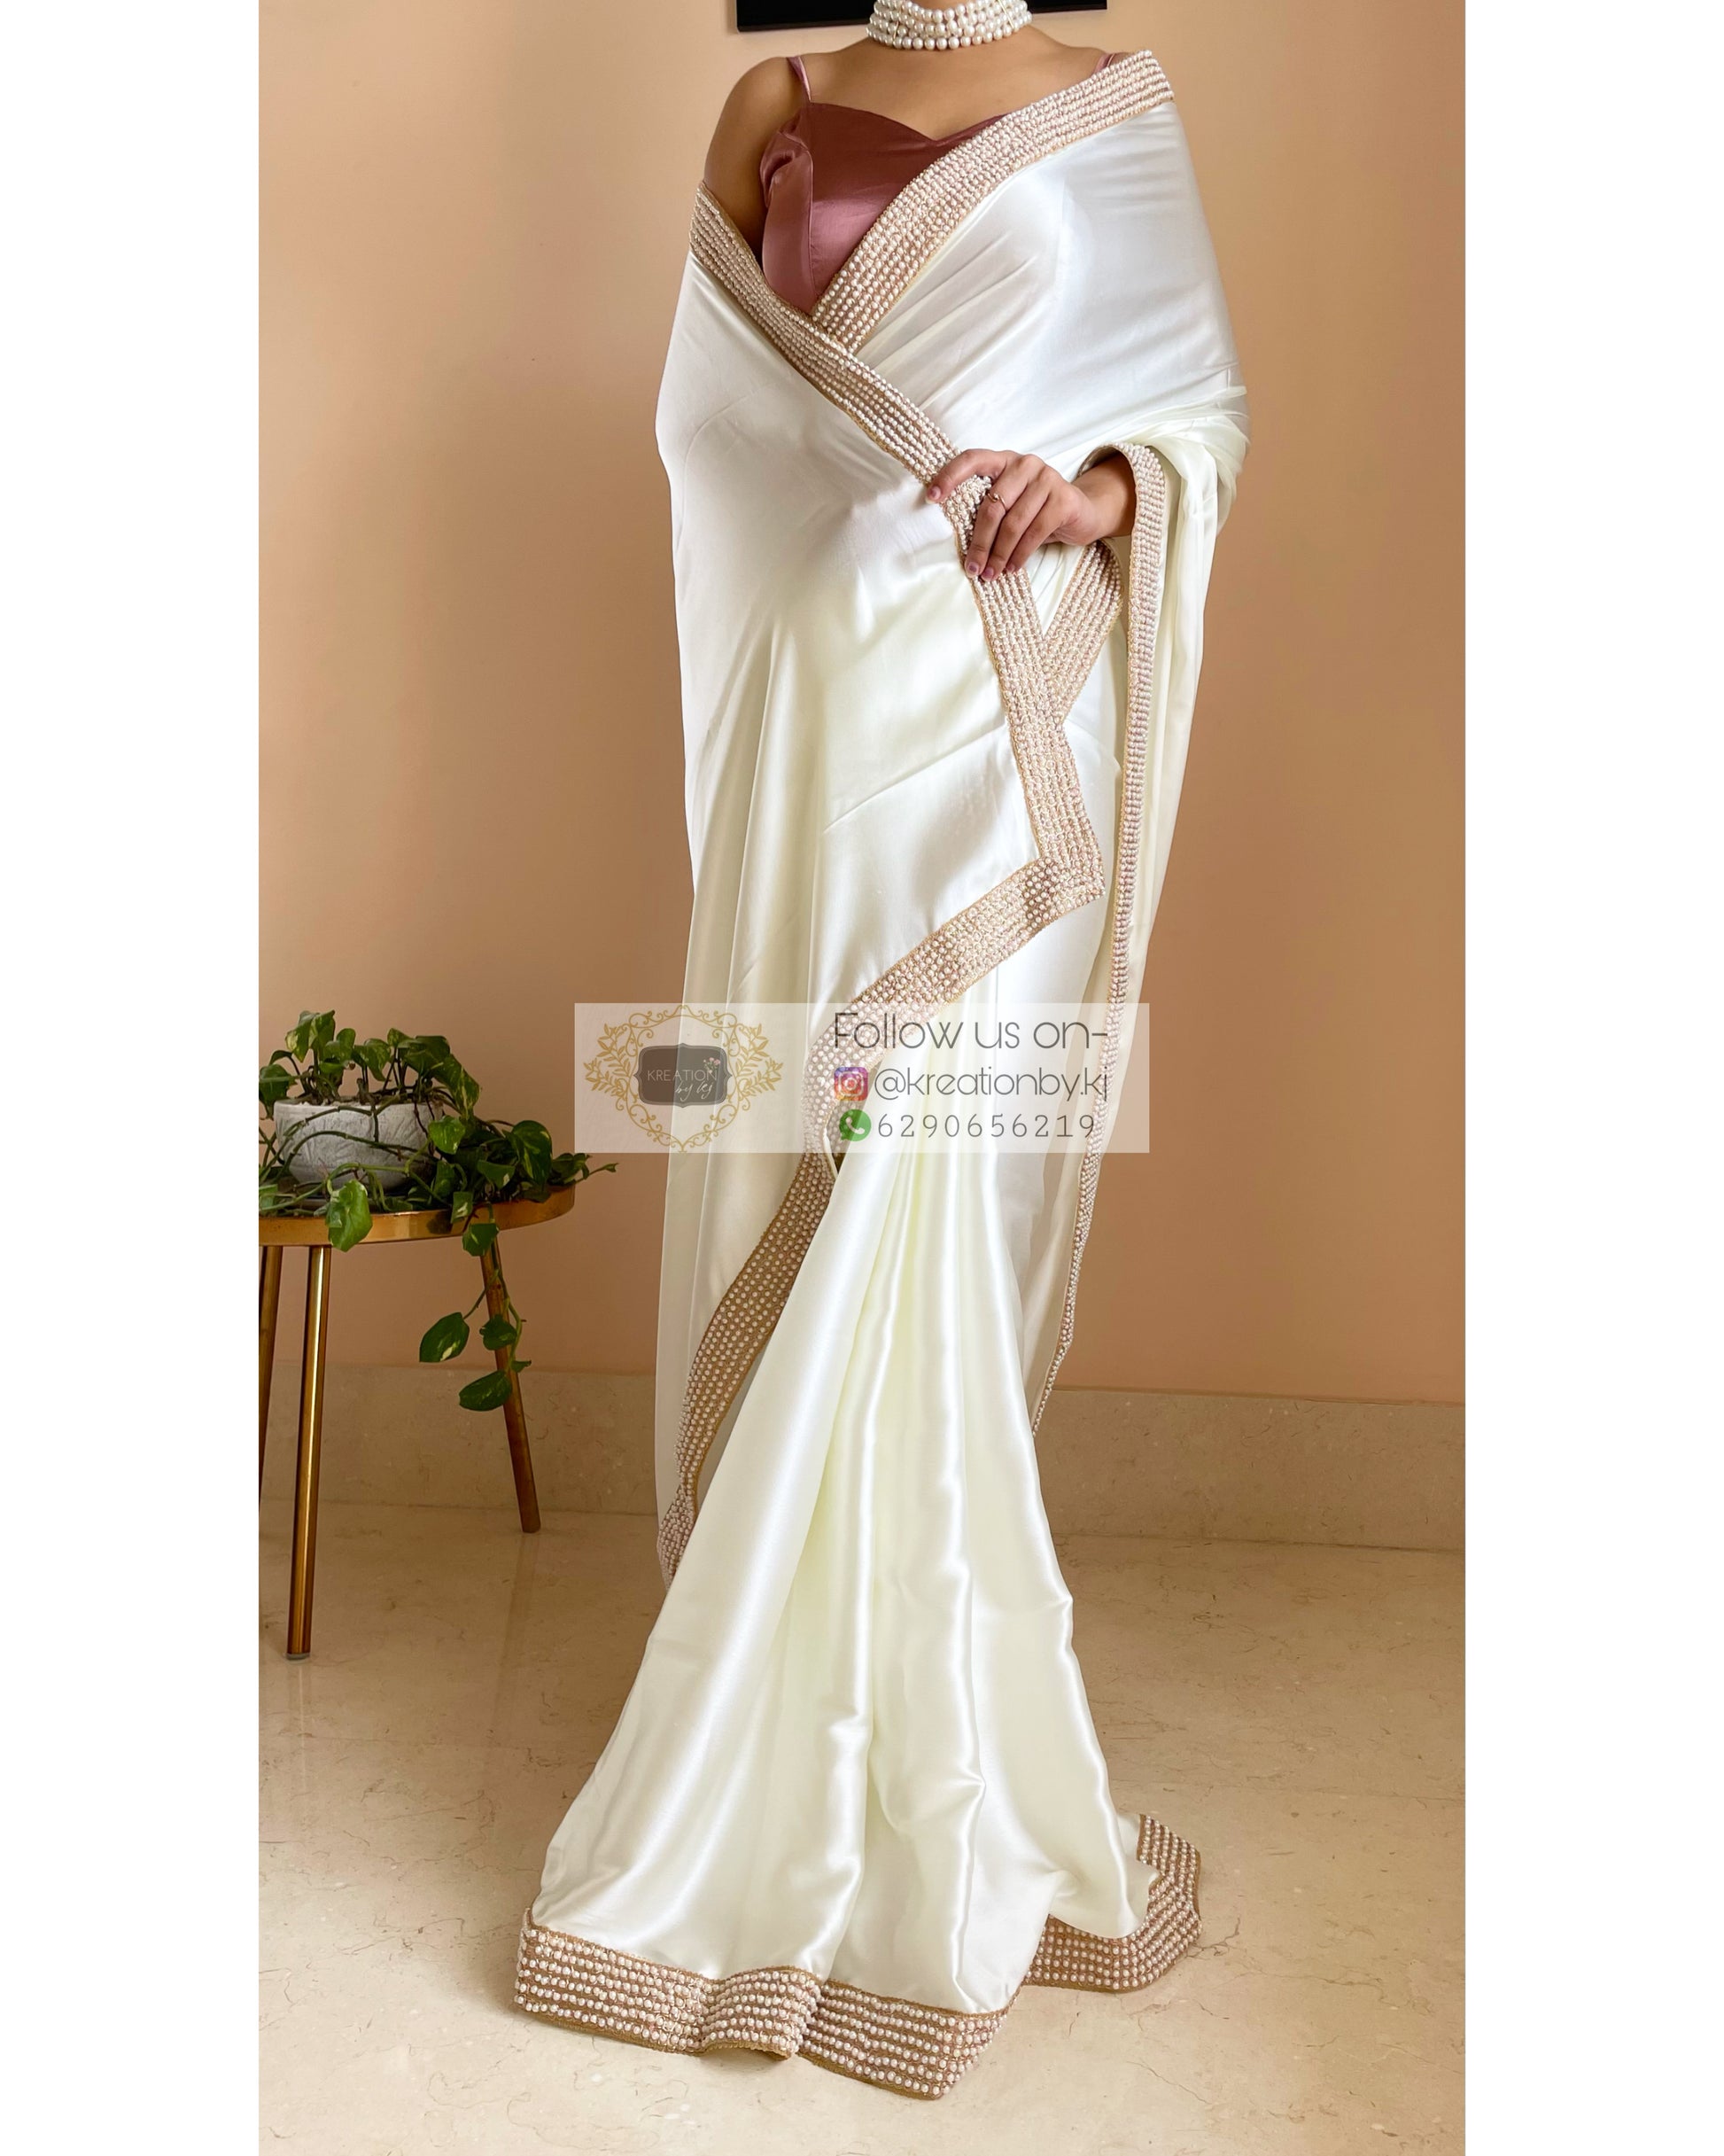 Party Wear Beautiful Beige Saree w/ Pink Stone & Pearl Border (Only Saree)  #27263 | Buy Online @ DesiClik.com, USA